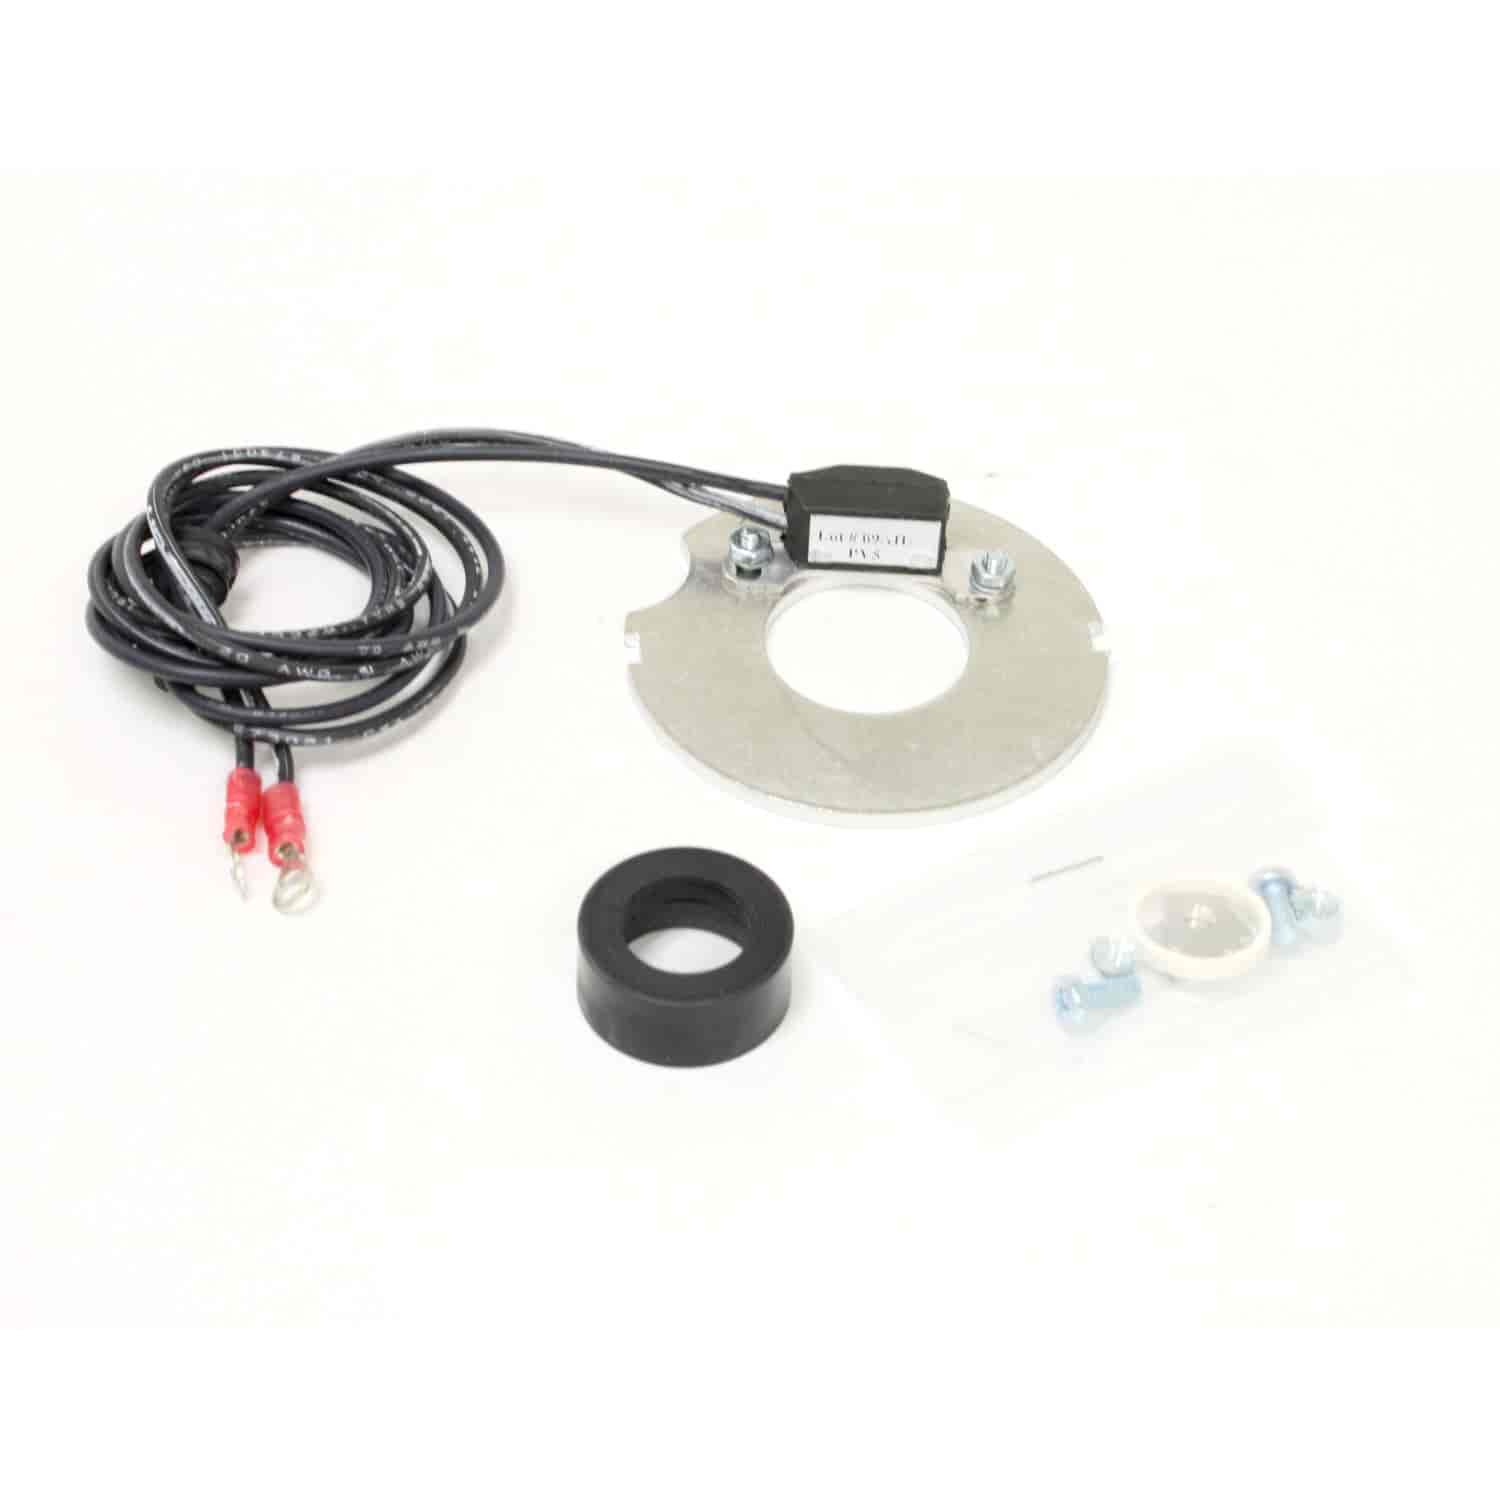 Ignitor Electronic Ignition Conversion Kit for ROLLS ROYCE